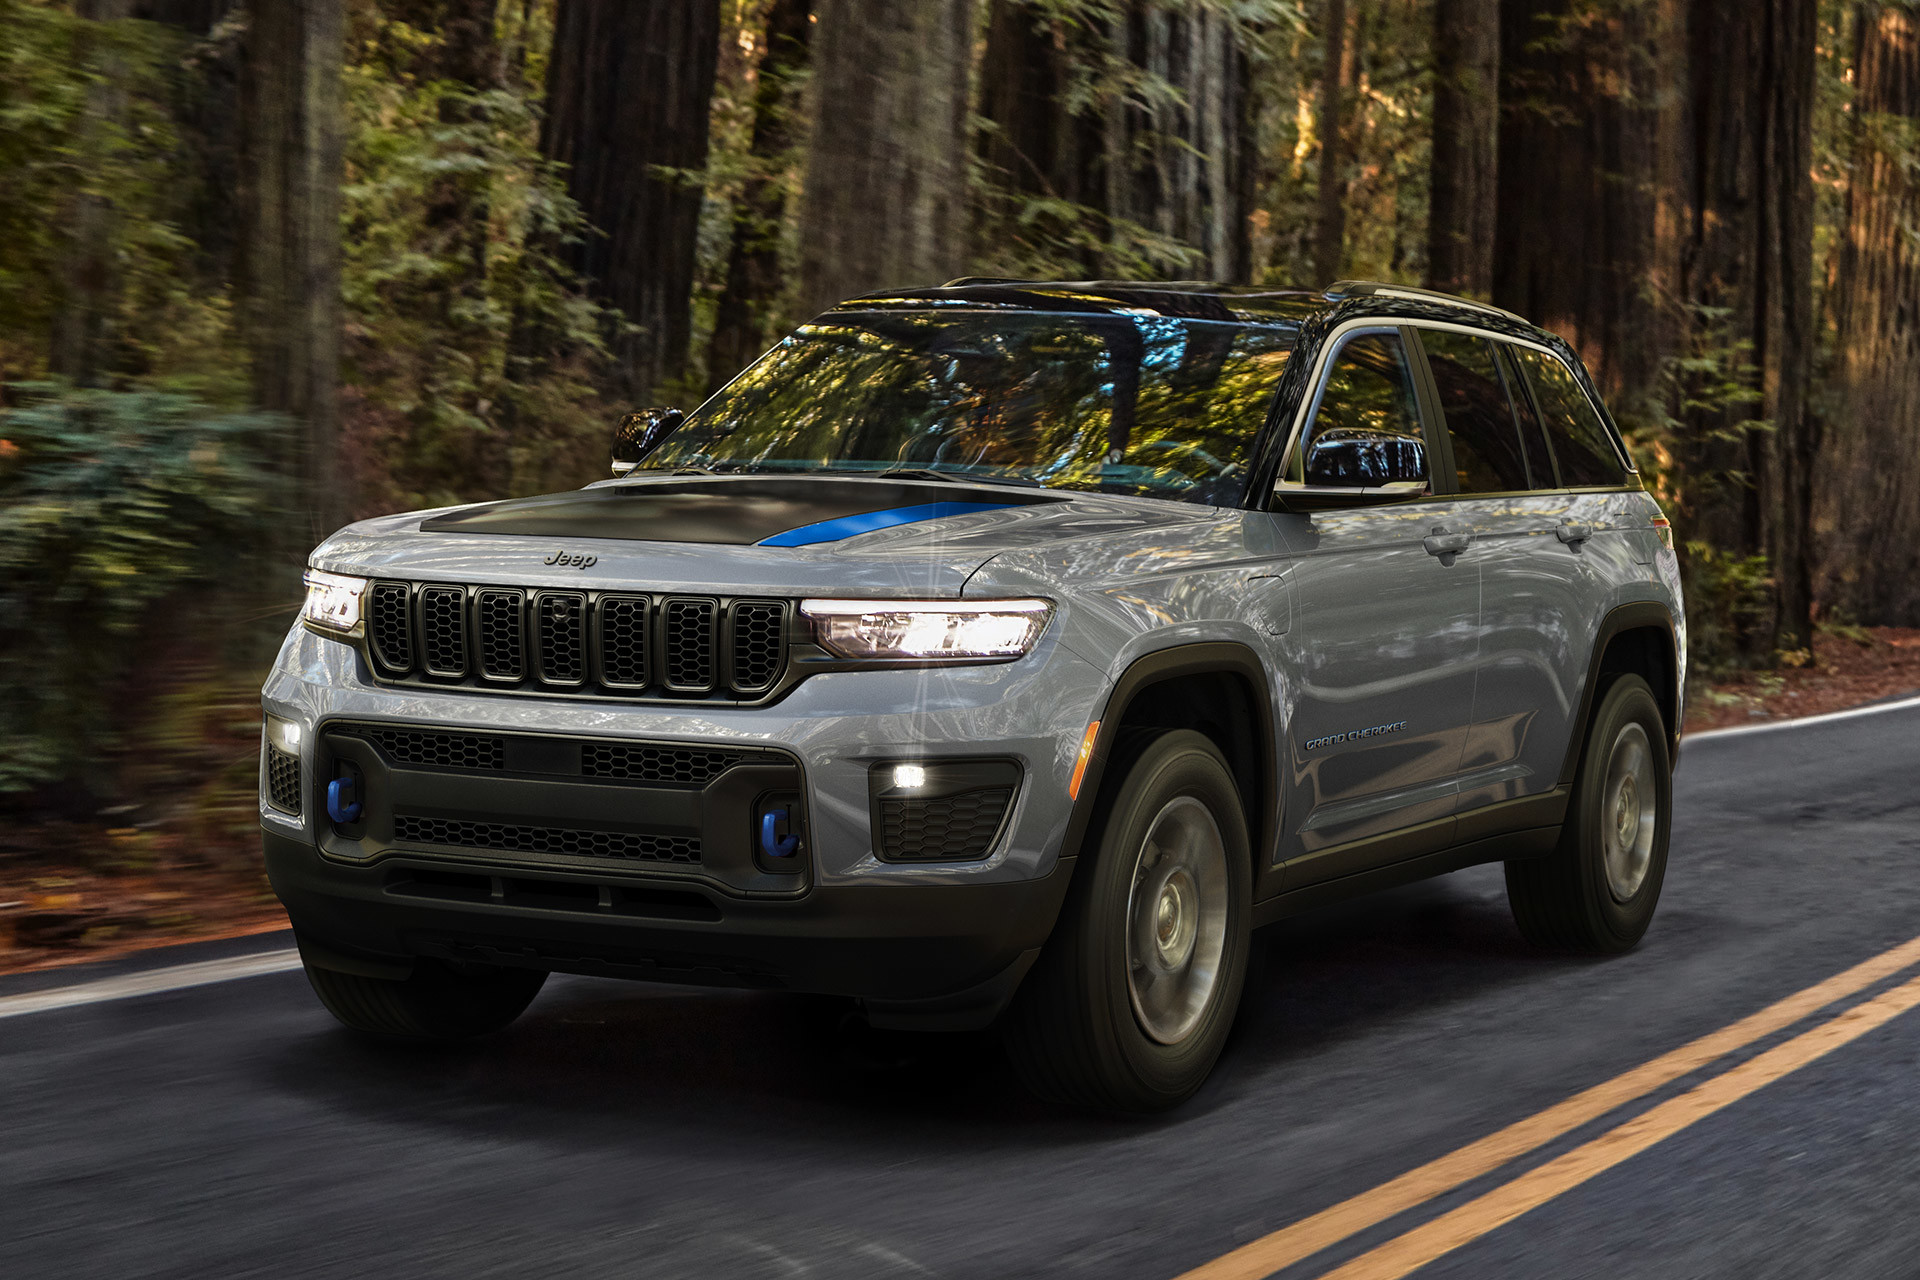 Front view of an All-New 2022 Jeep Grand Cherokee 4xe being driven down a forest road.